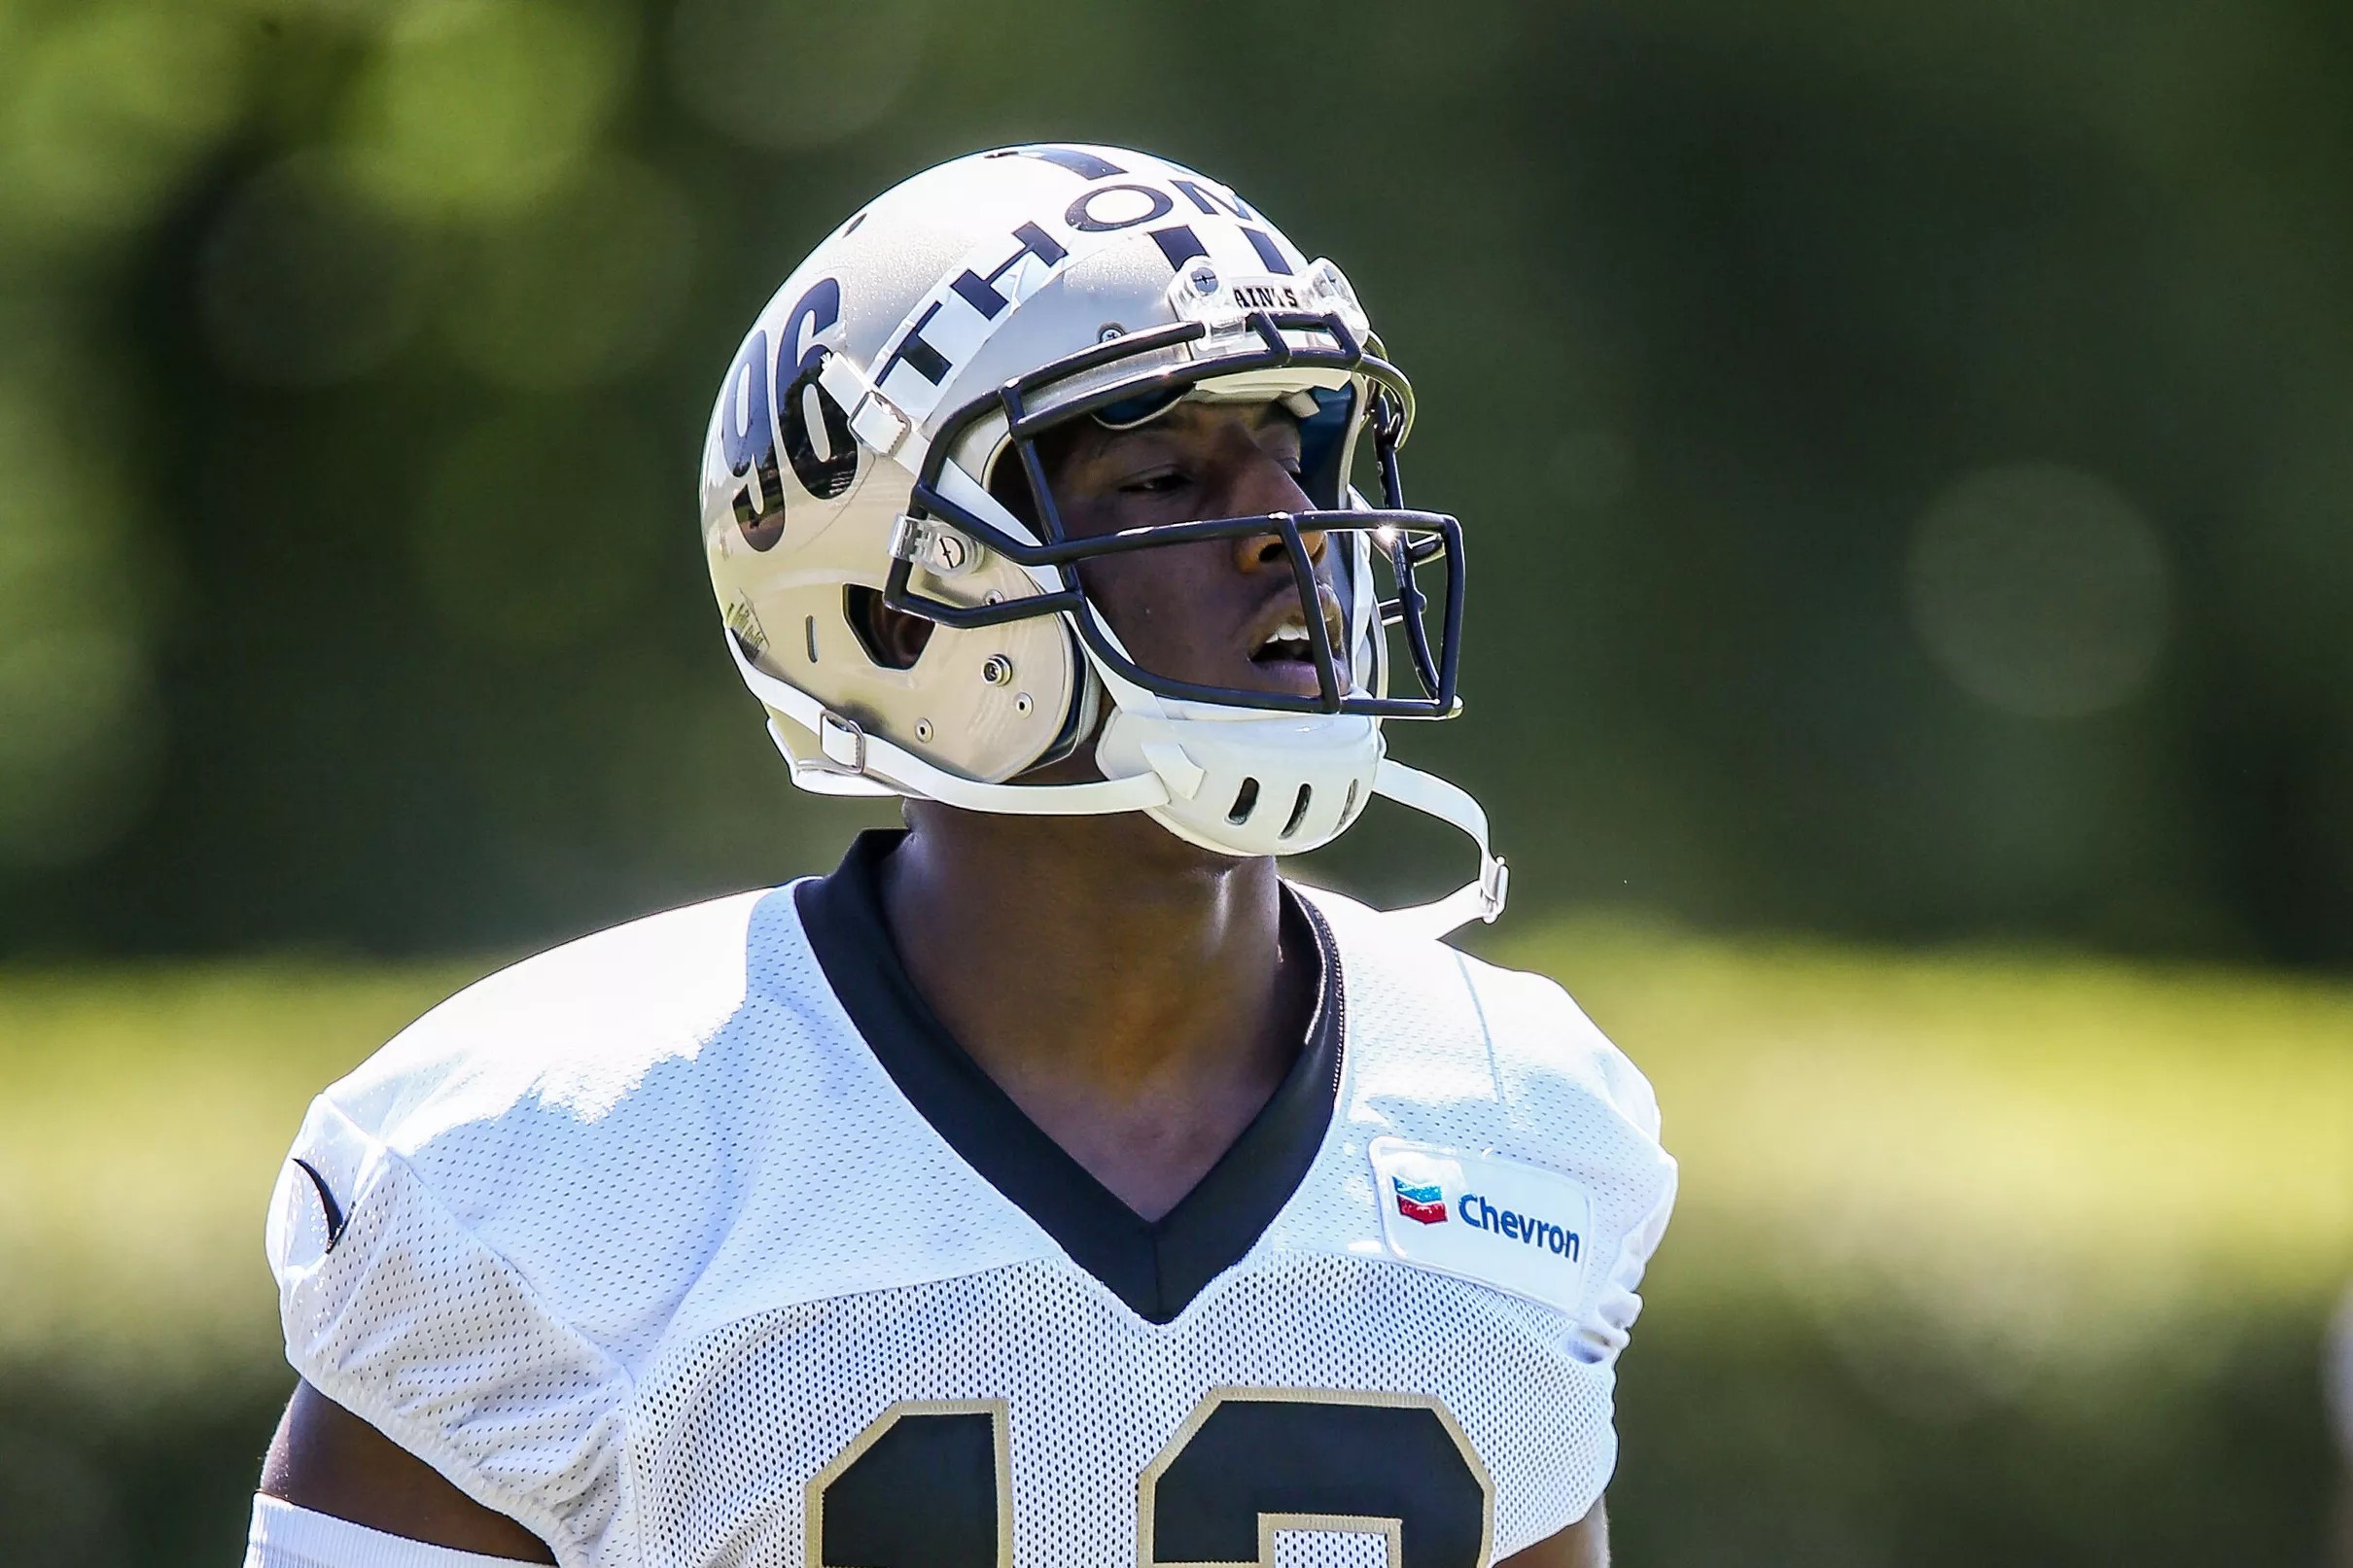 Michael Thomas Named as a “Main Candidate” for Fantasy Football Regression